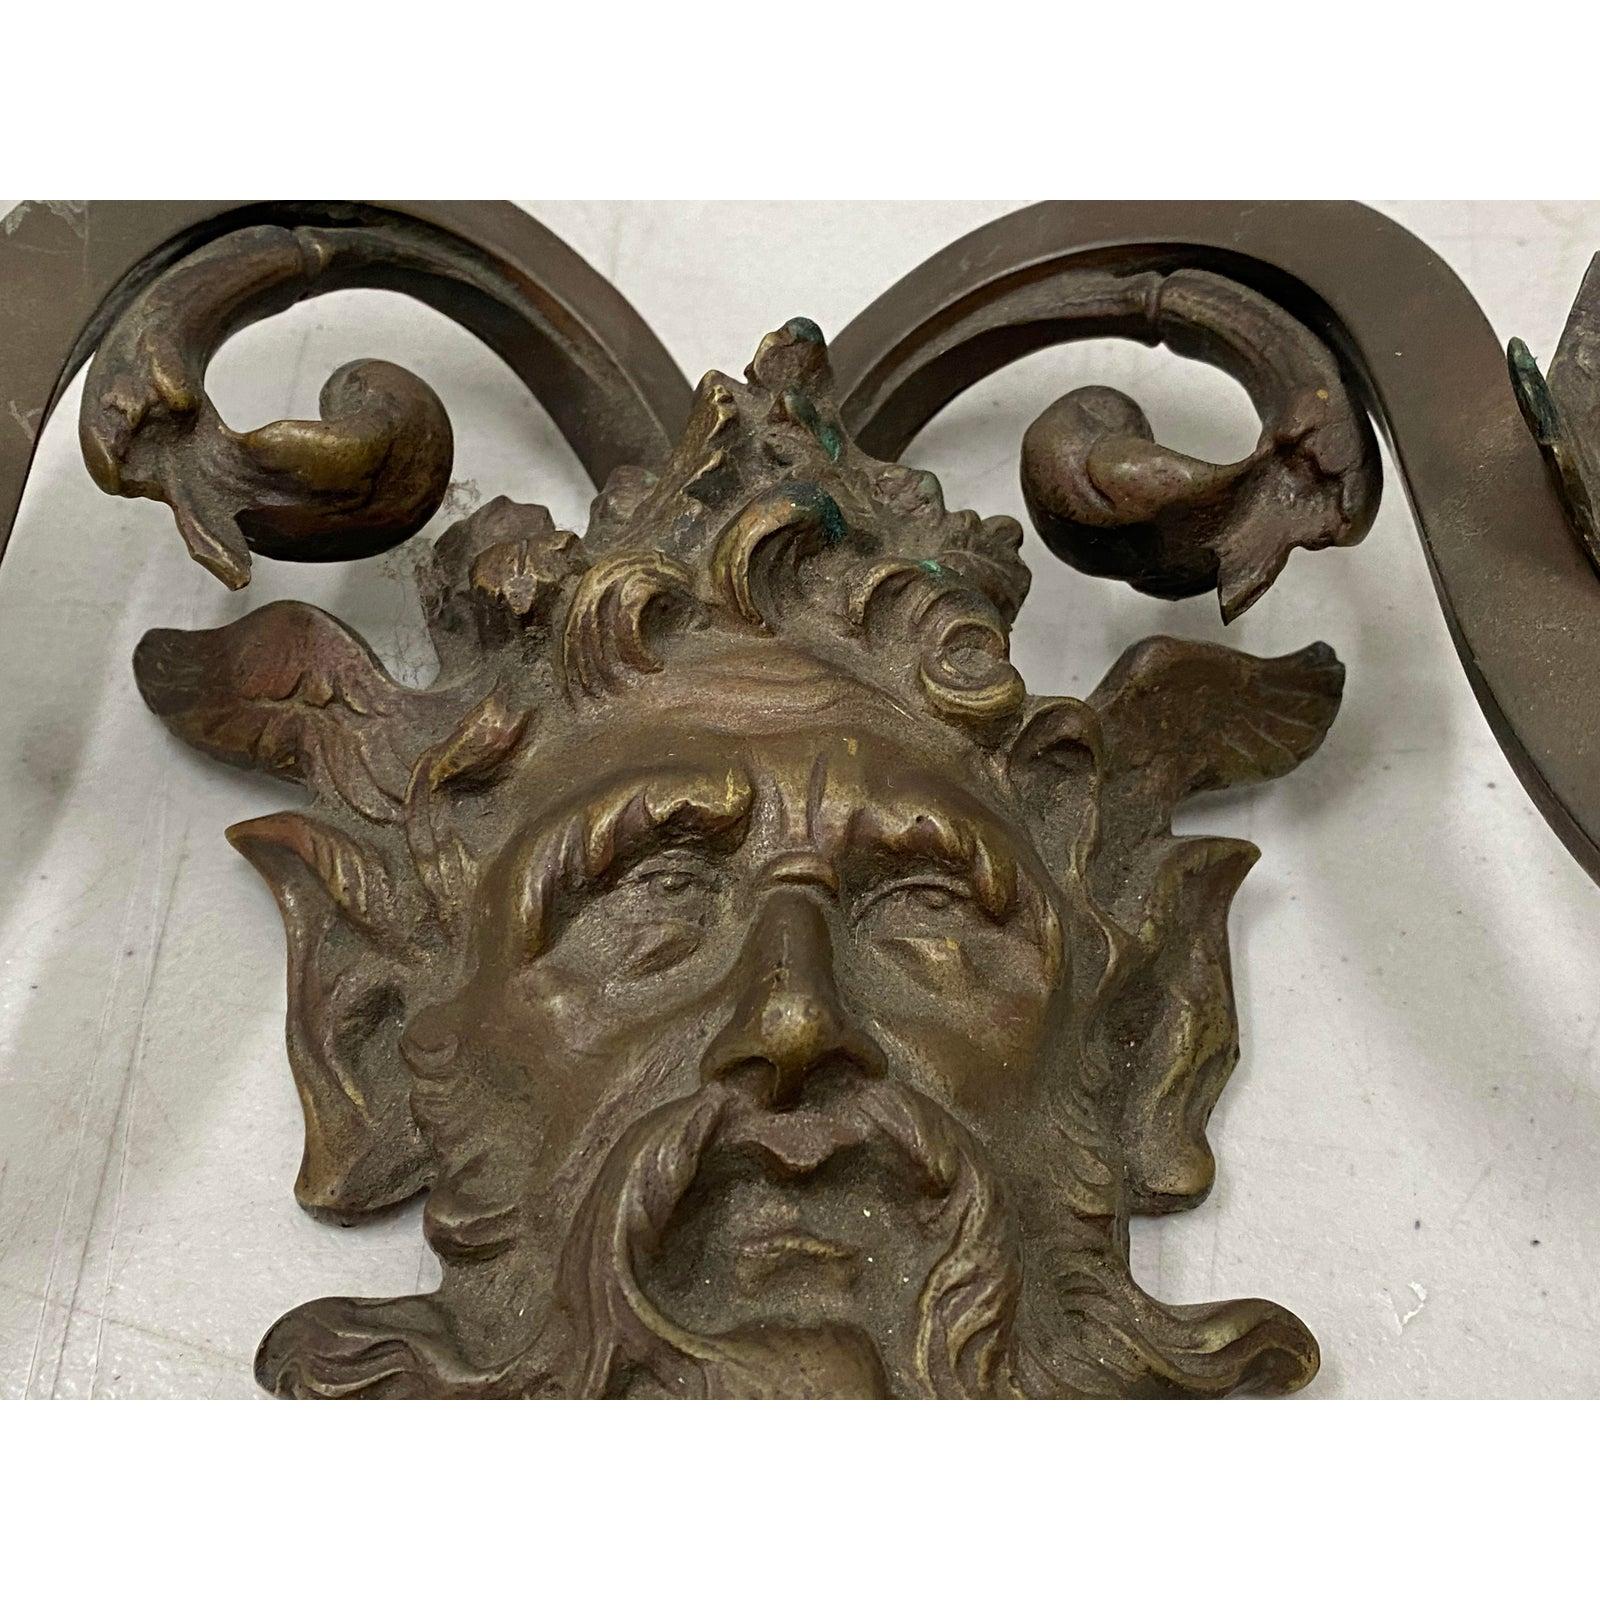 Pair of early 20th century cast bronze sconces

Each sconce measures: 16.5